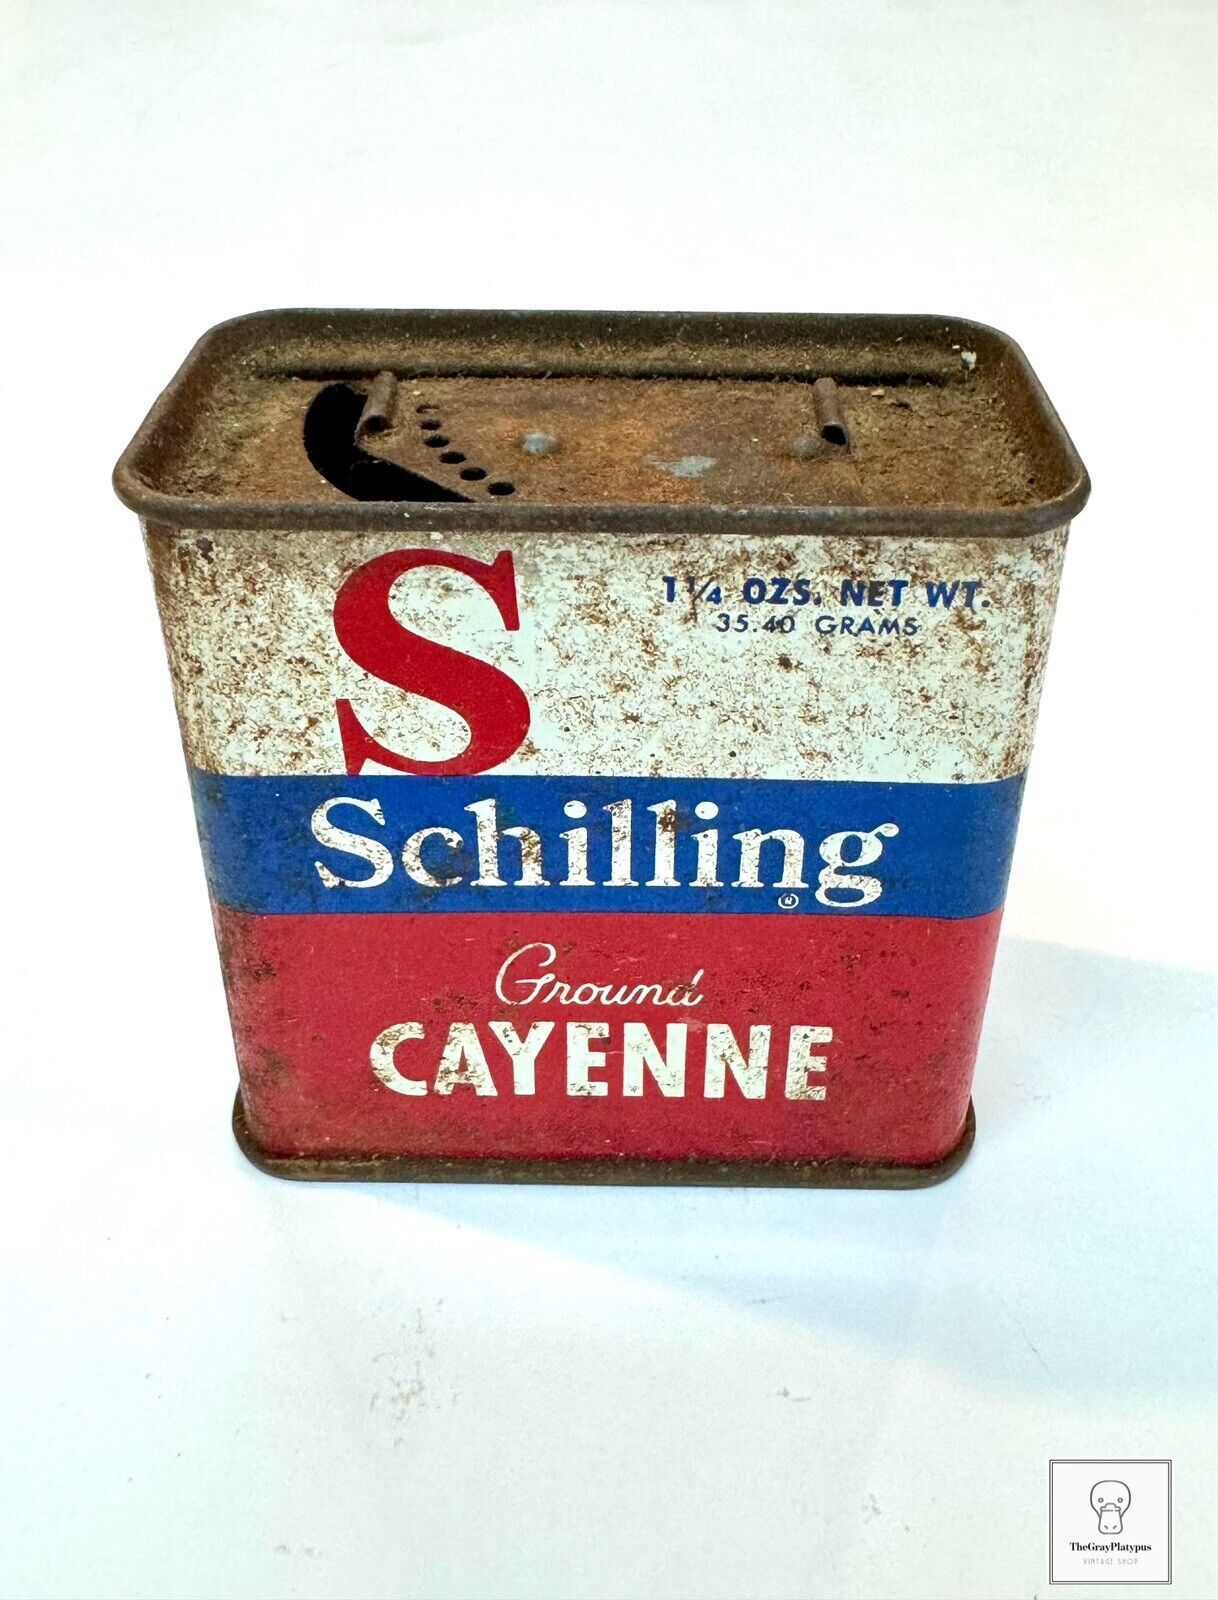 Vintage McCormick Schilling Ground Cayenne Spice Tin San Francisco Baltimore Red